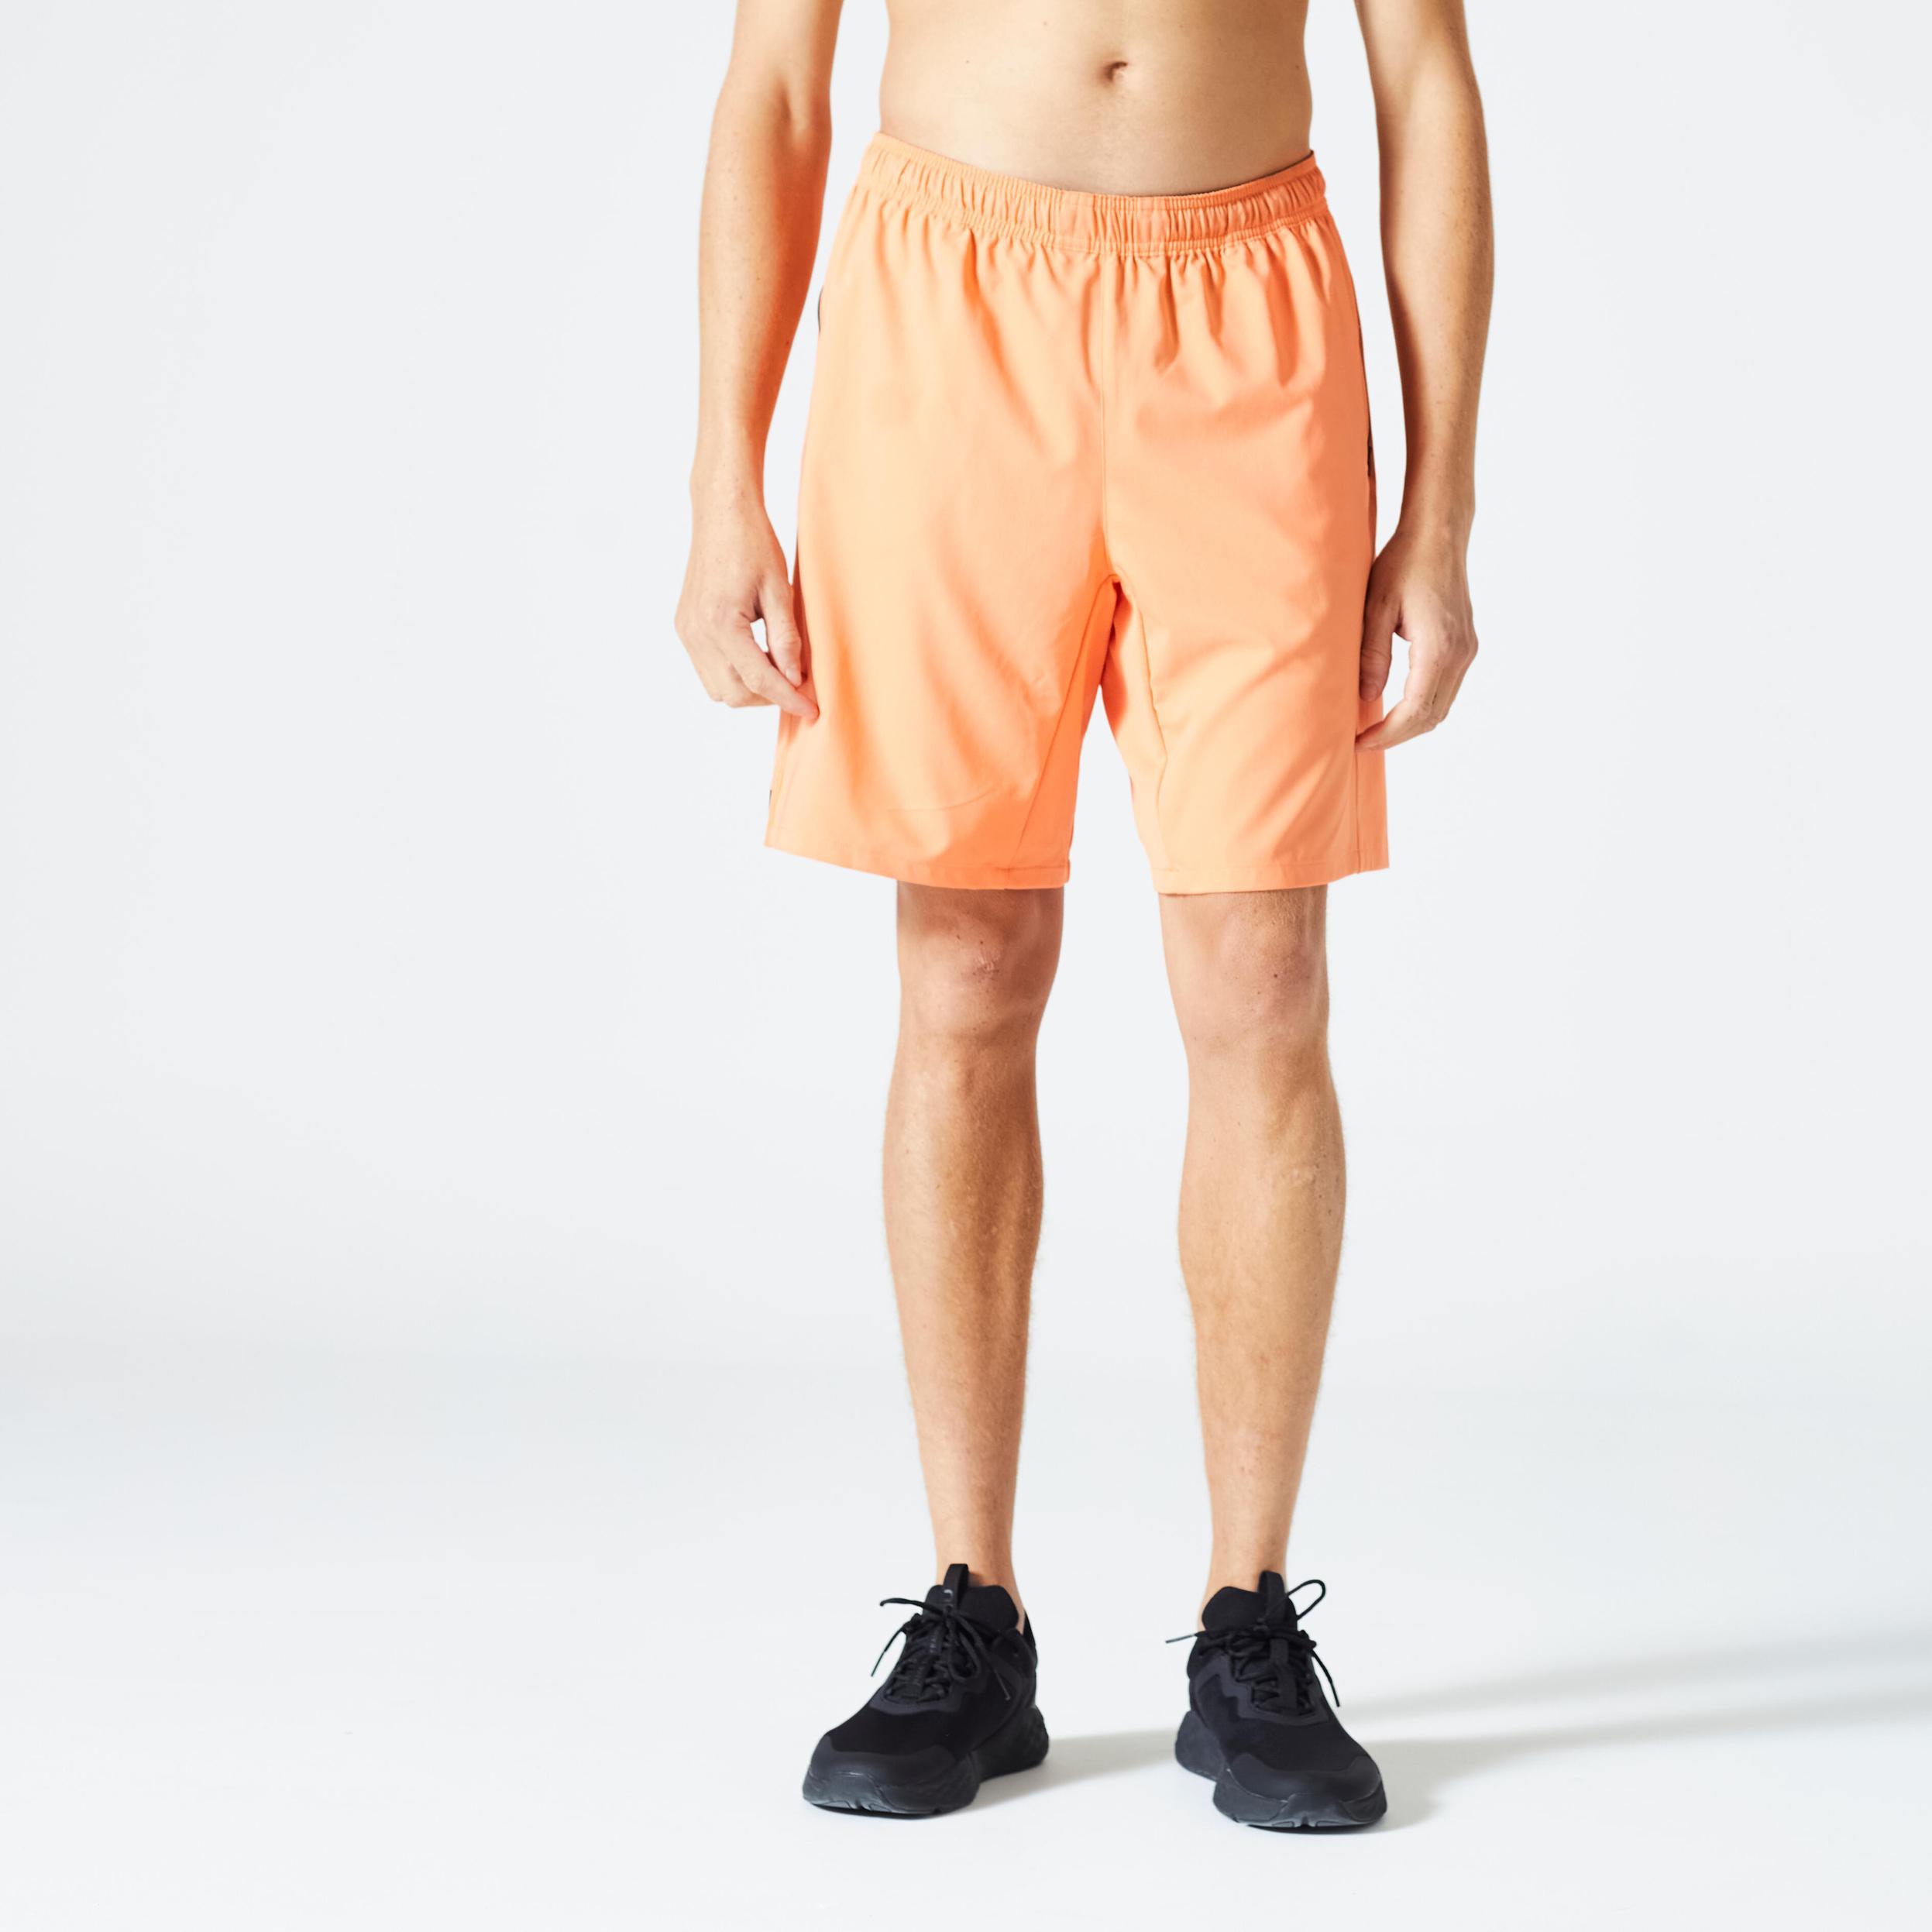 Men's Fitness Shorts With Zipper Pockets - Orange offers at S$ 10.9 in Decathlon